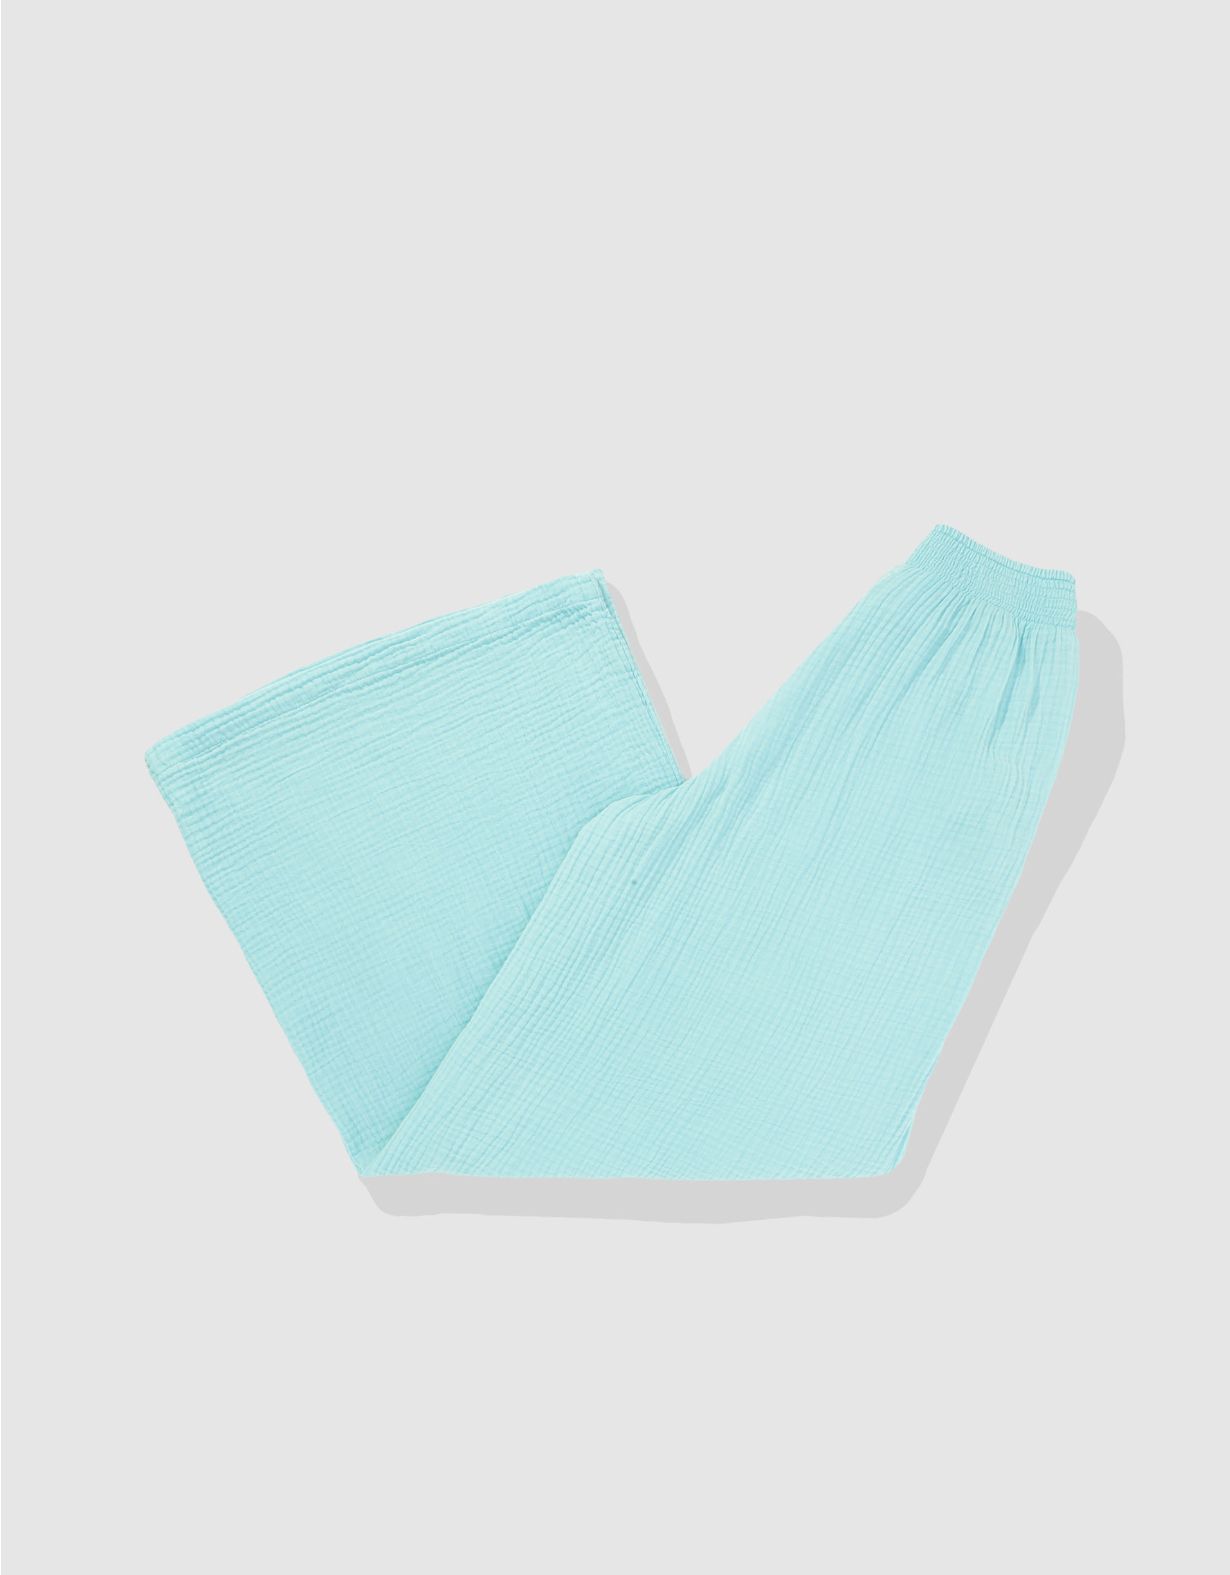 Aerie High Waisted Pool-To-Party Pant